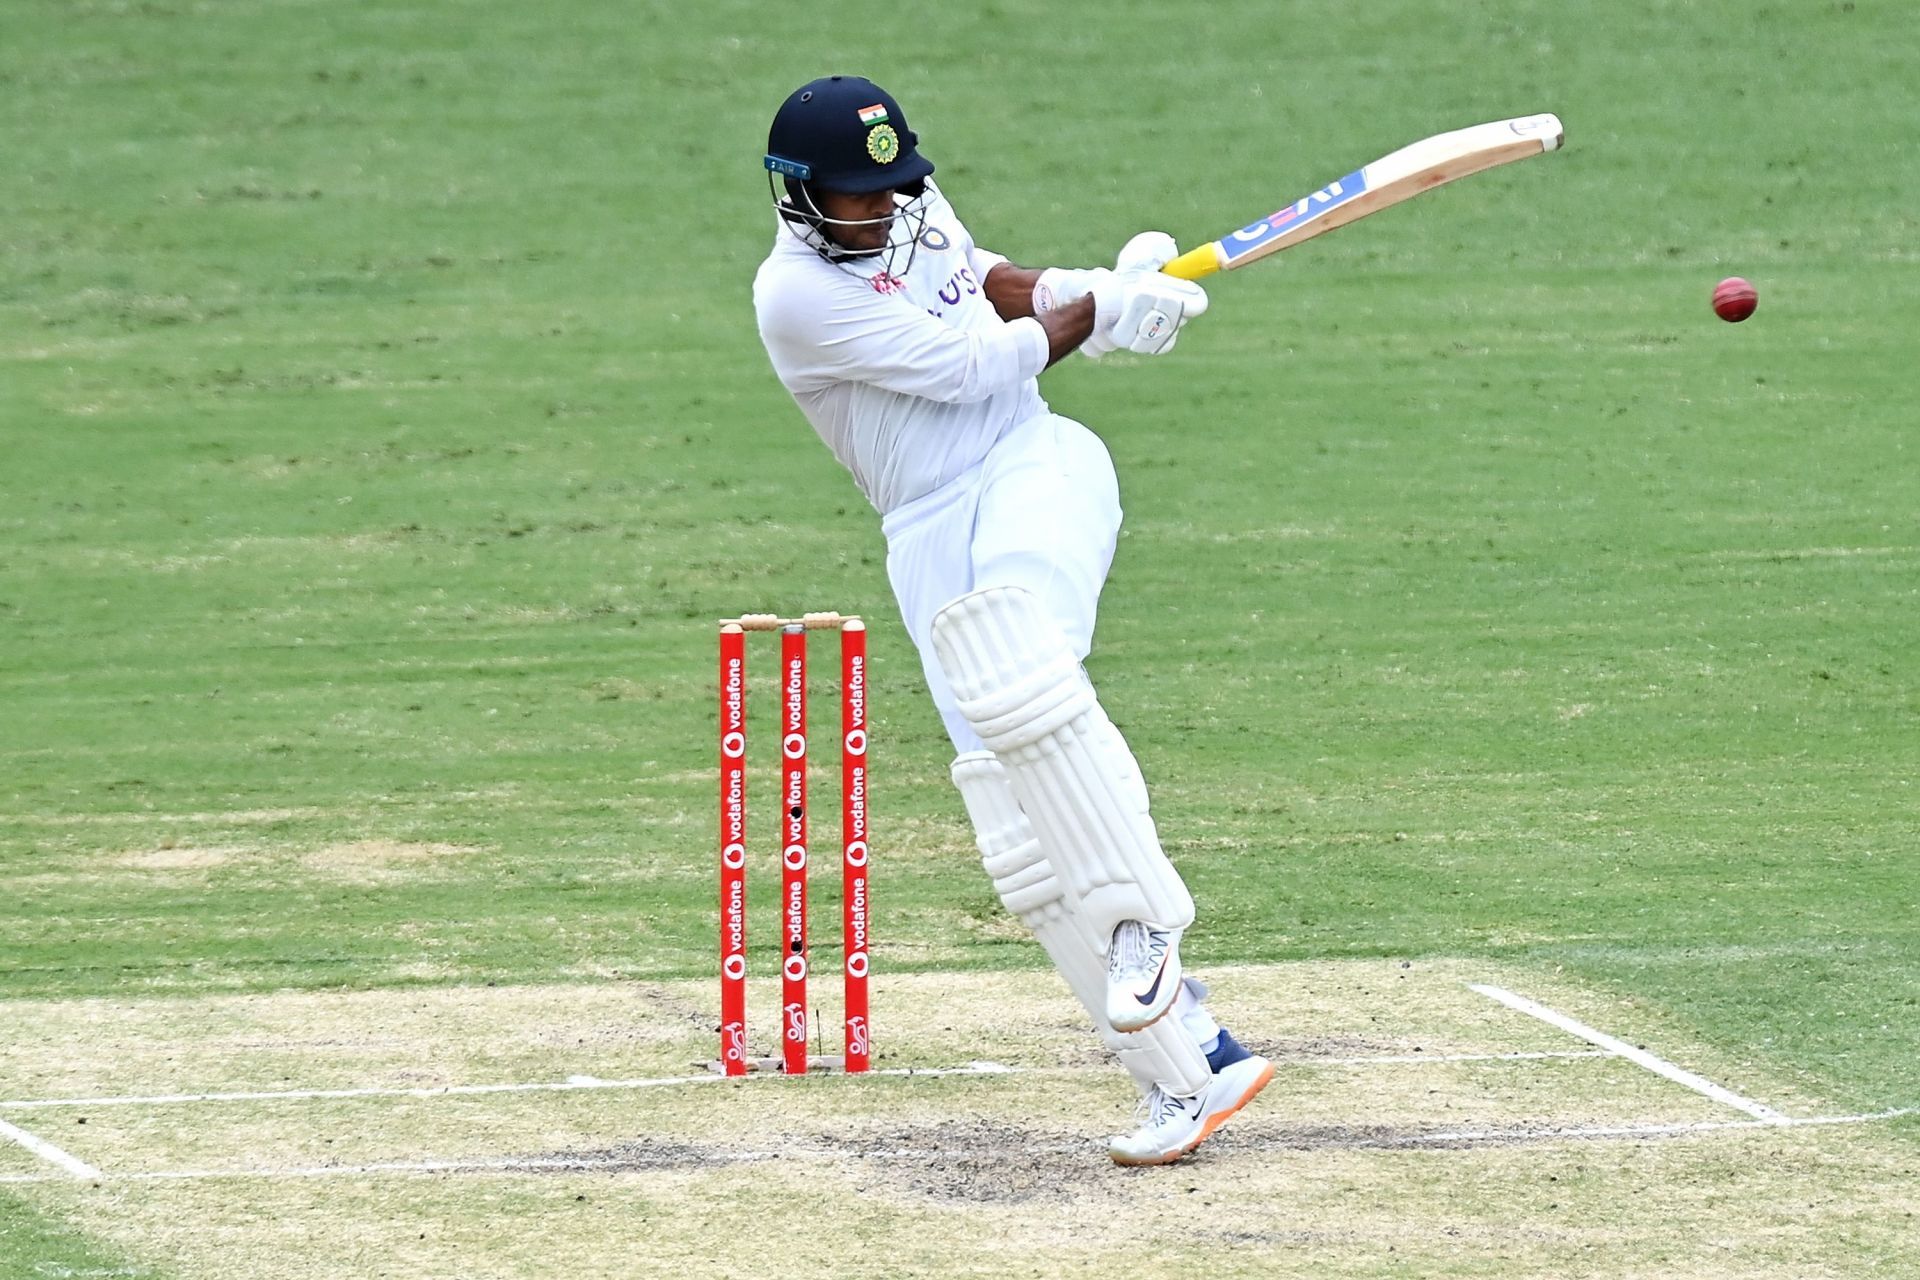 Mayank Agarwal averages 26.76 in Tests away from home